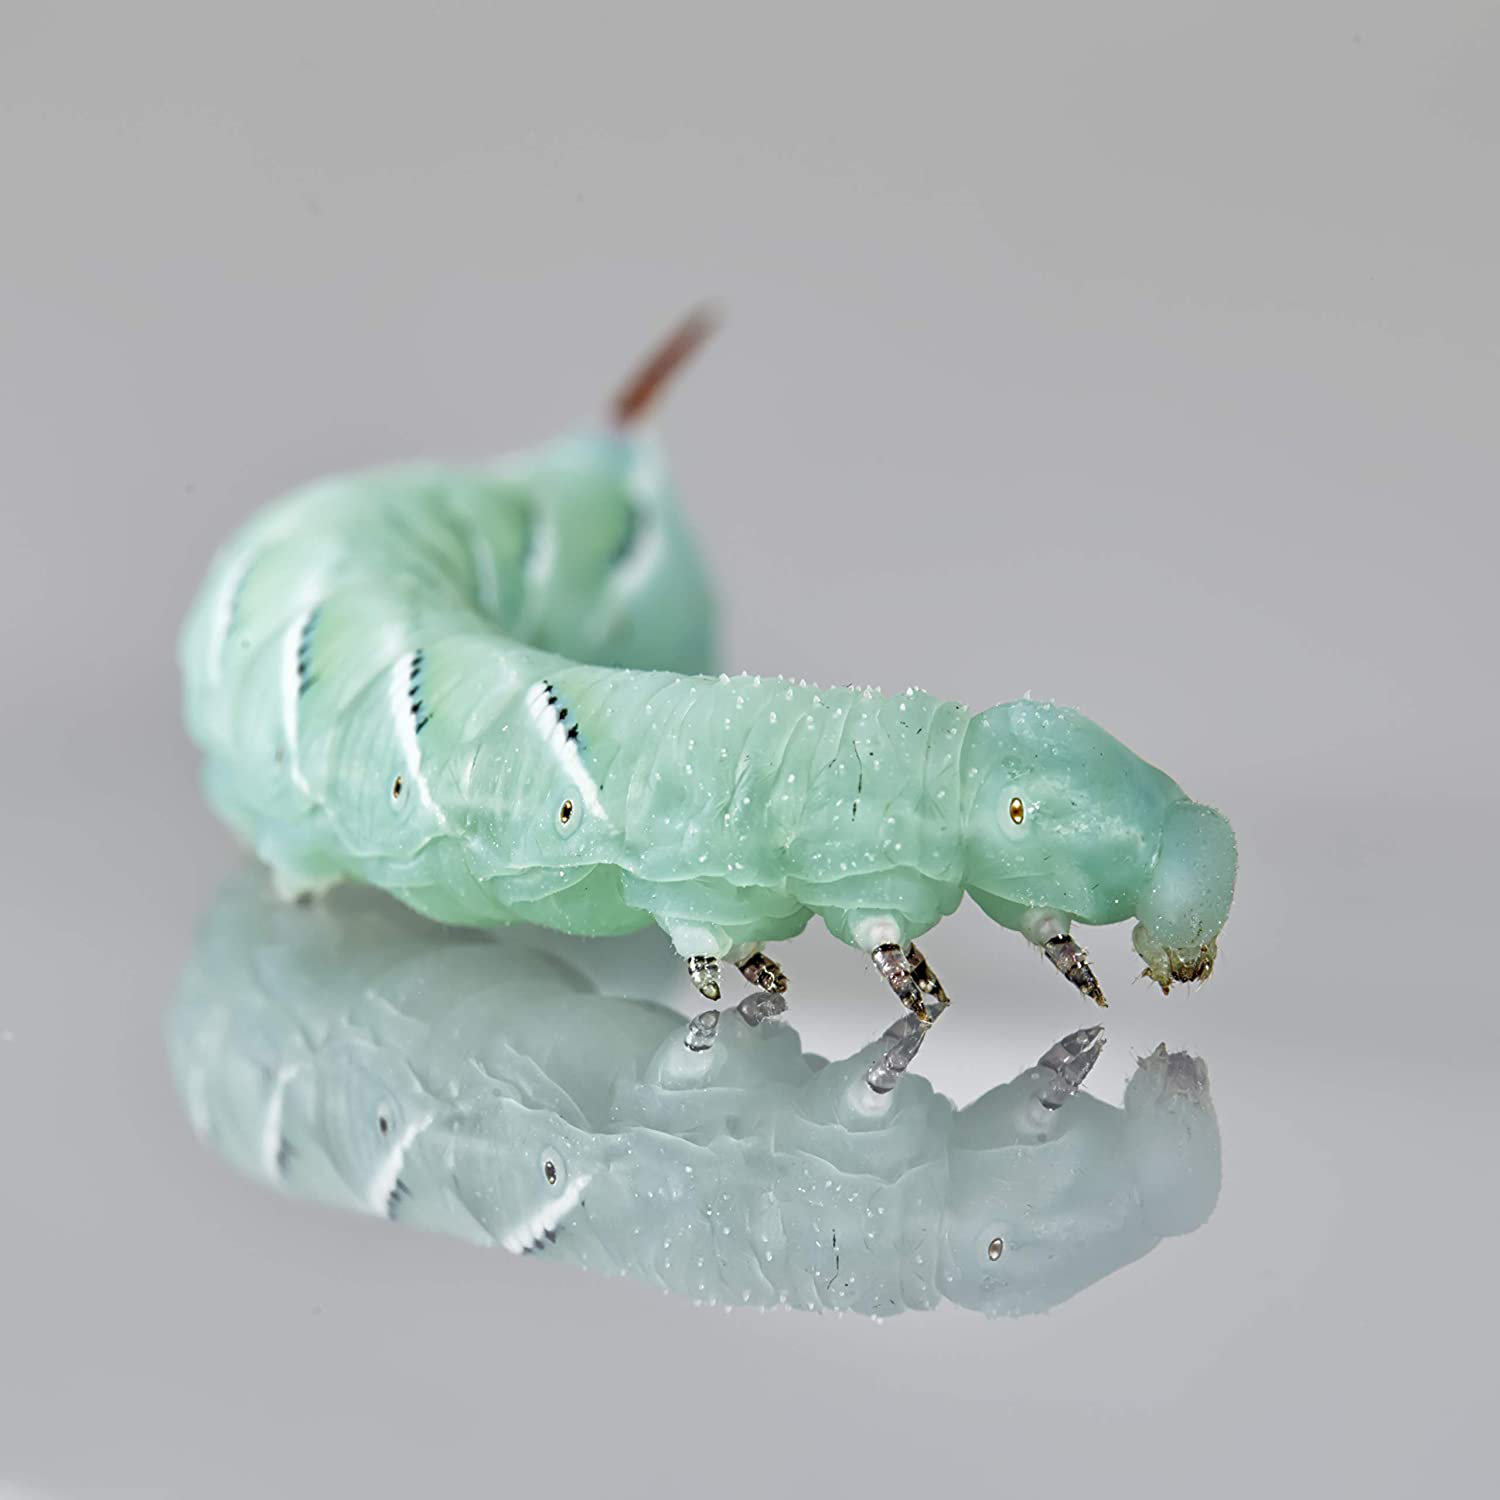 Dbdpet Premium 40-55 Live Hornworms (2 Cups of 20-30Ct) - Food for Bearded Dragons, Leopard Geckos, Frogs, Chameleons, Tegus, and Other Reptiles! Animals & Pet Supplies > Pet Supplies > Reptile & Amphibian Supplies > Reptile & Amphibian Substrates DBDPet   